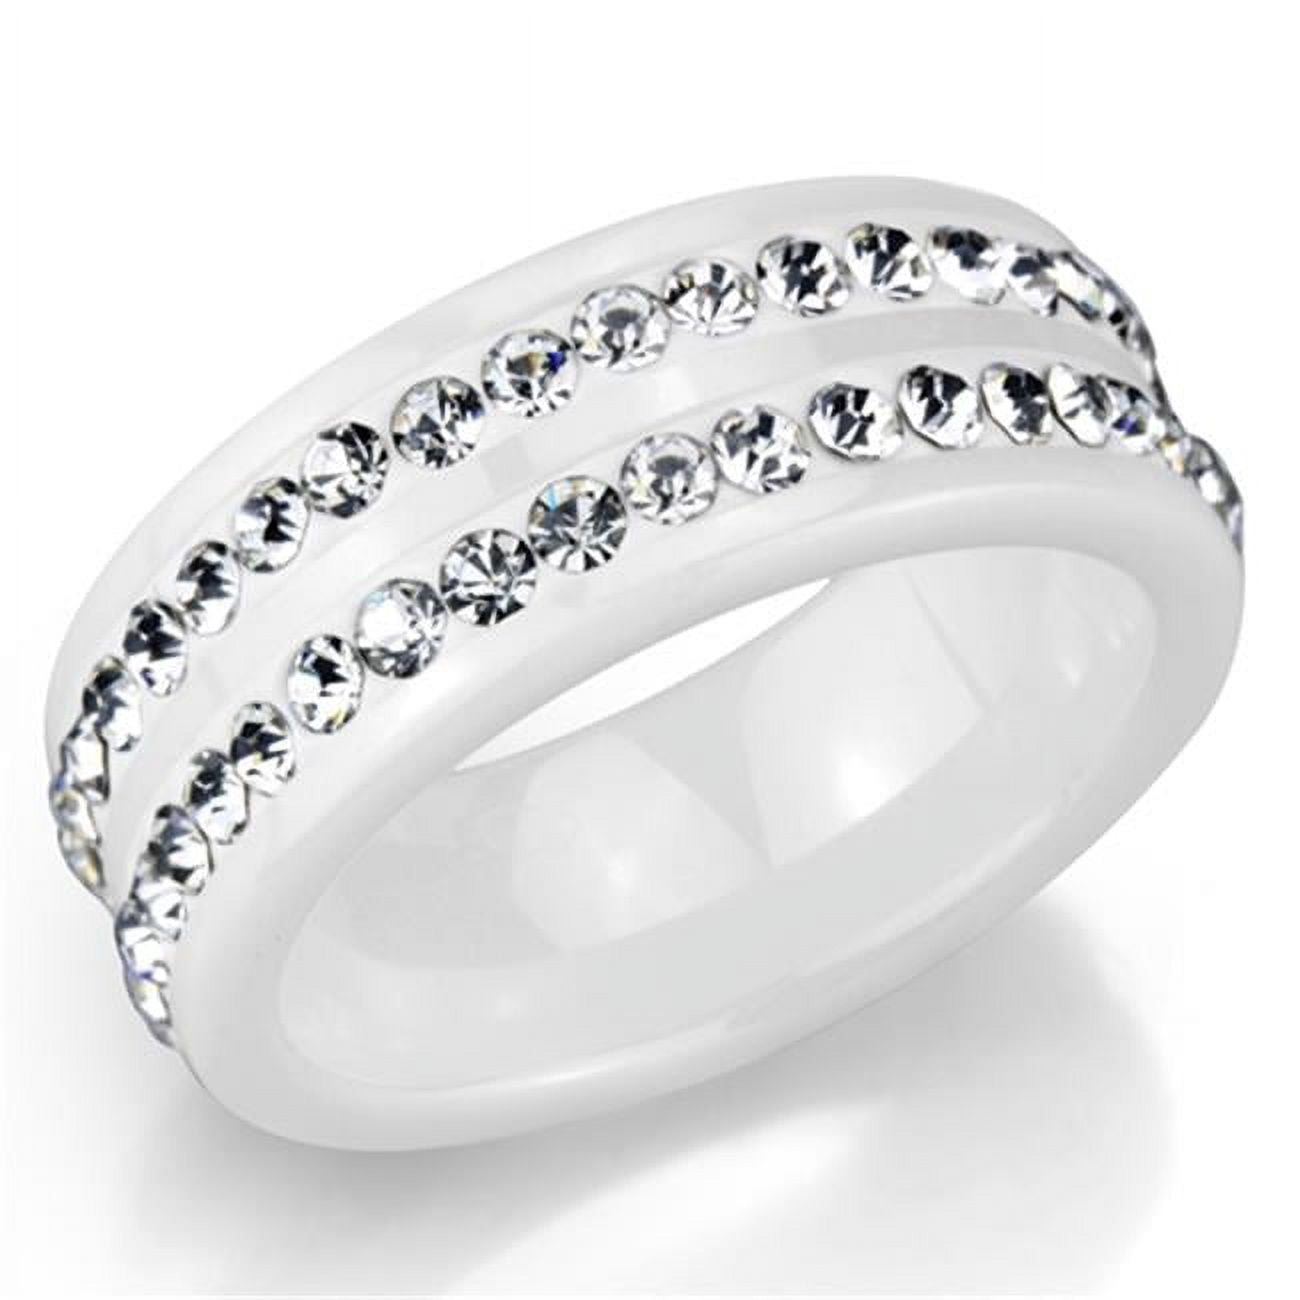 Picture of Alamode 3W970-6 Women High Polished Stainless Steel Ring with Ceramic in White - Size 6